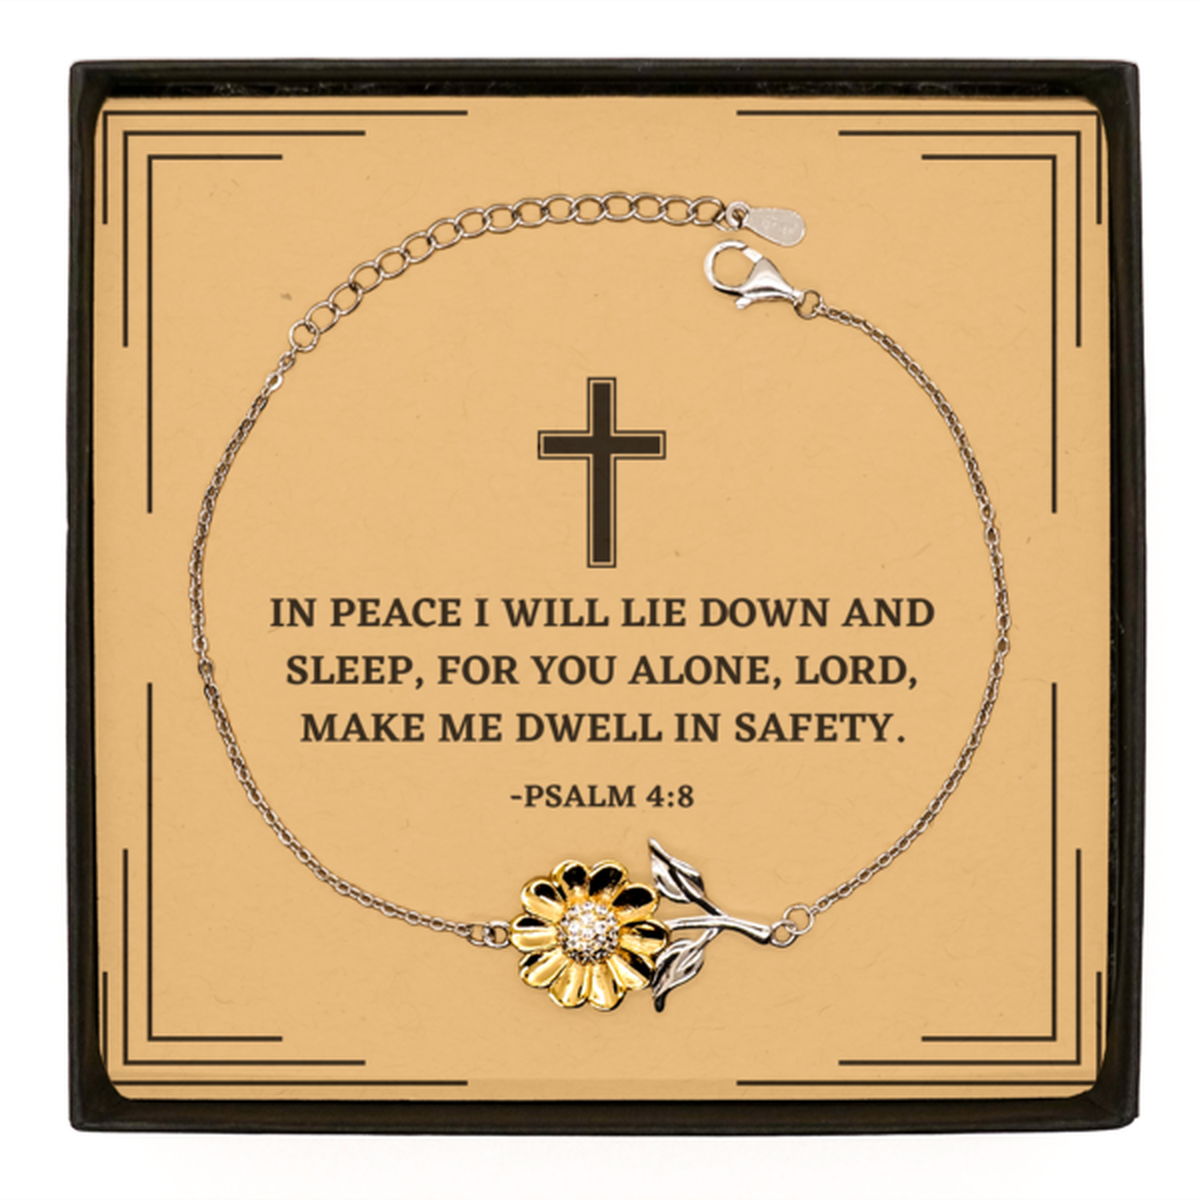 Baptism Gifts For Teenage Boys Girls, Christian Bible Verse Sterling Silver Sunflower Bracelet, In peace I will lie down and sleep, Confirmation Gifts, Bible Verse Card for Son, Godson, Grandson